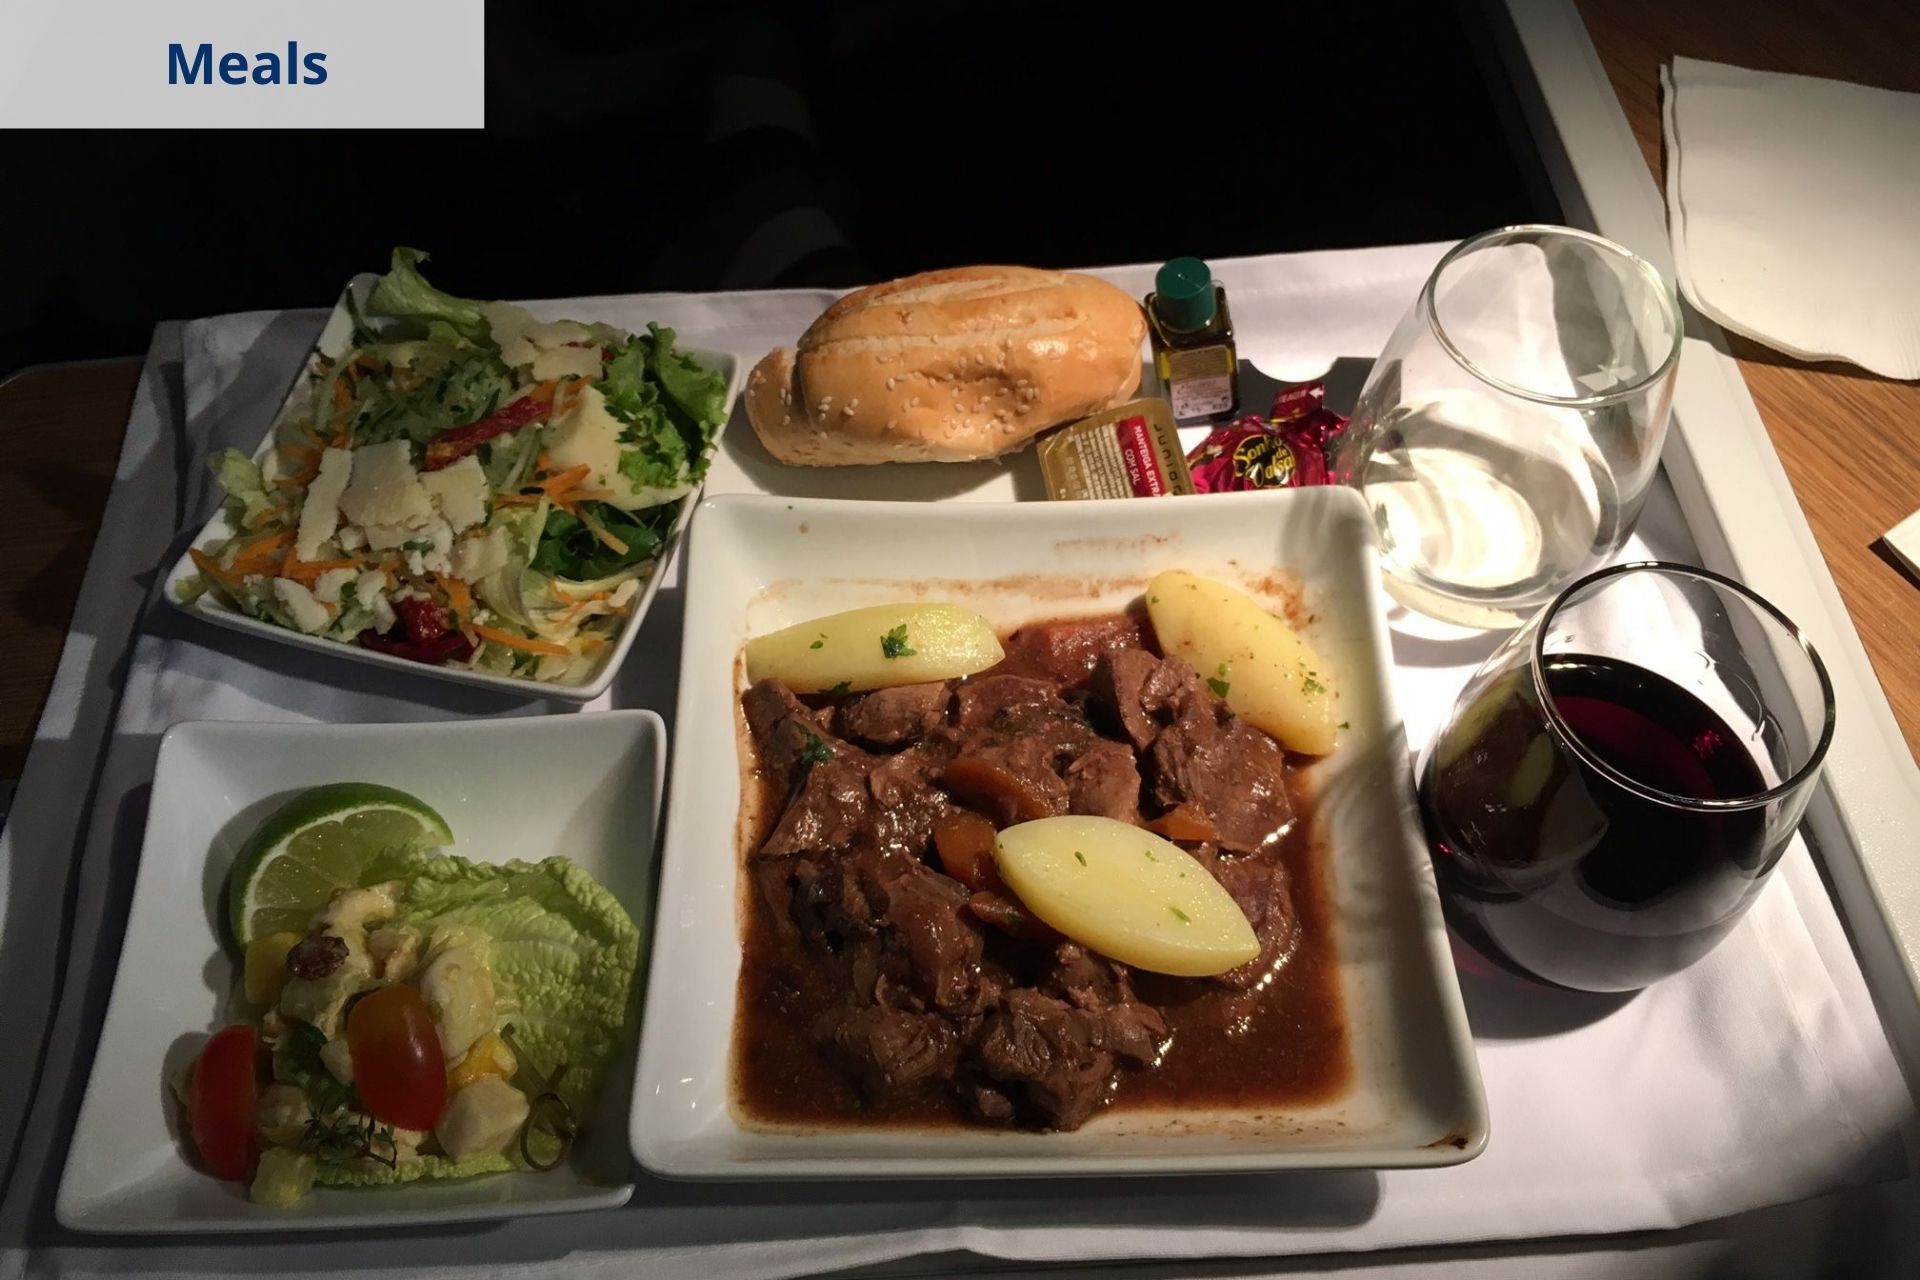 American Airlines Meals